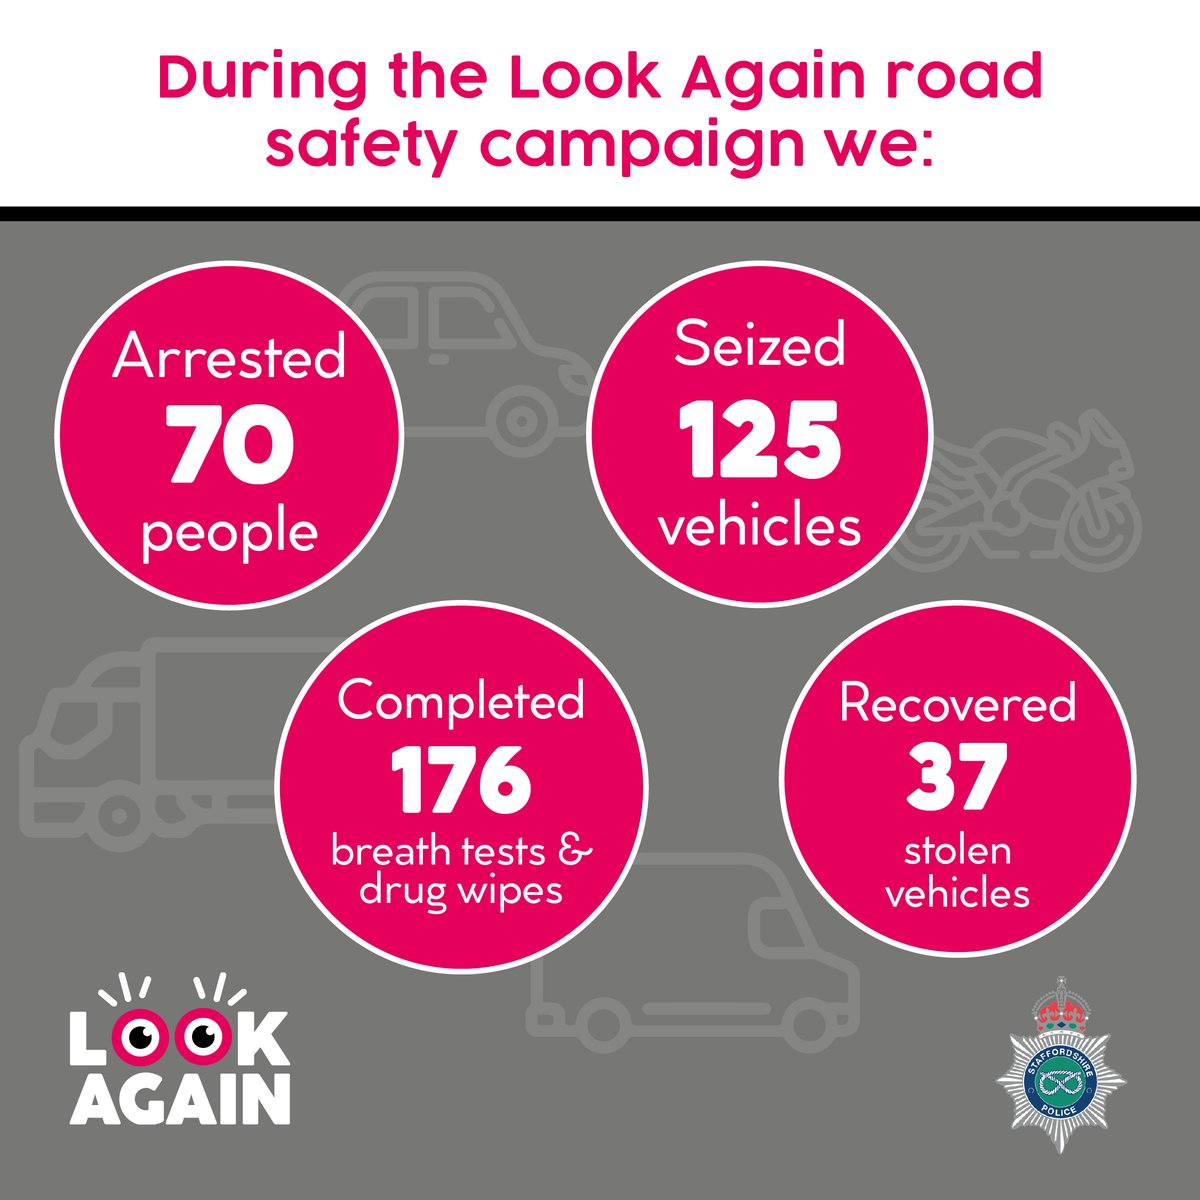 A road safety campaign aimed at helping to reduce the number of people killed or injured on Staffordshire’s roads has seen us make 70 arrests and take action against more than 300 drivers. More details: orlo.uk/r9HIx